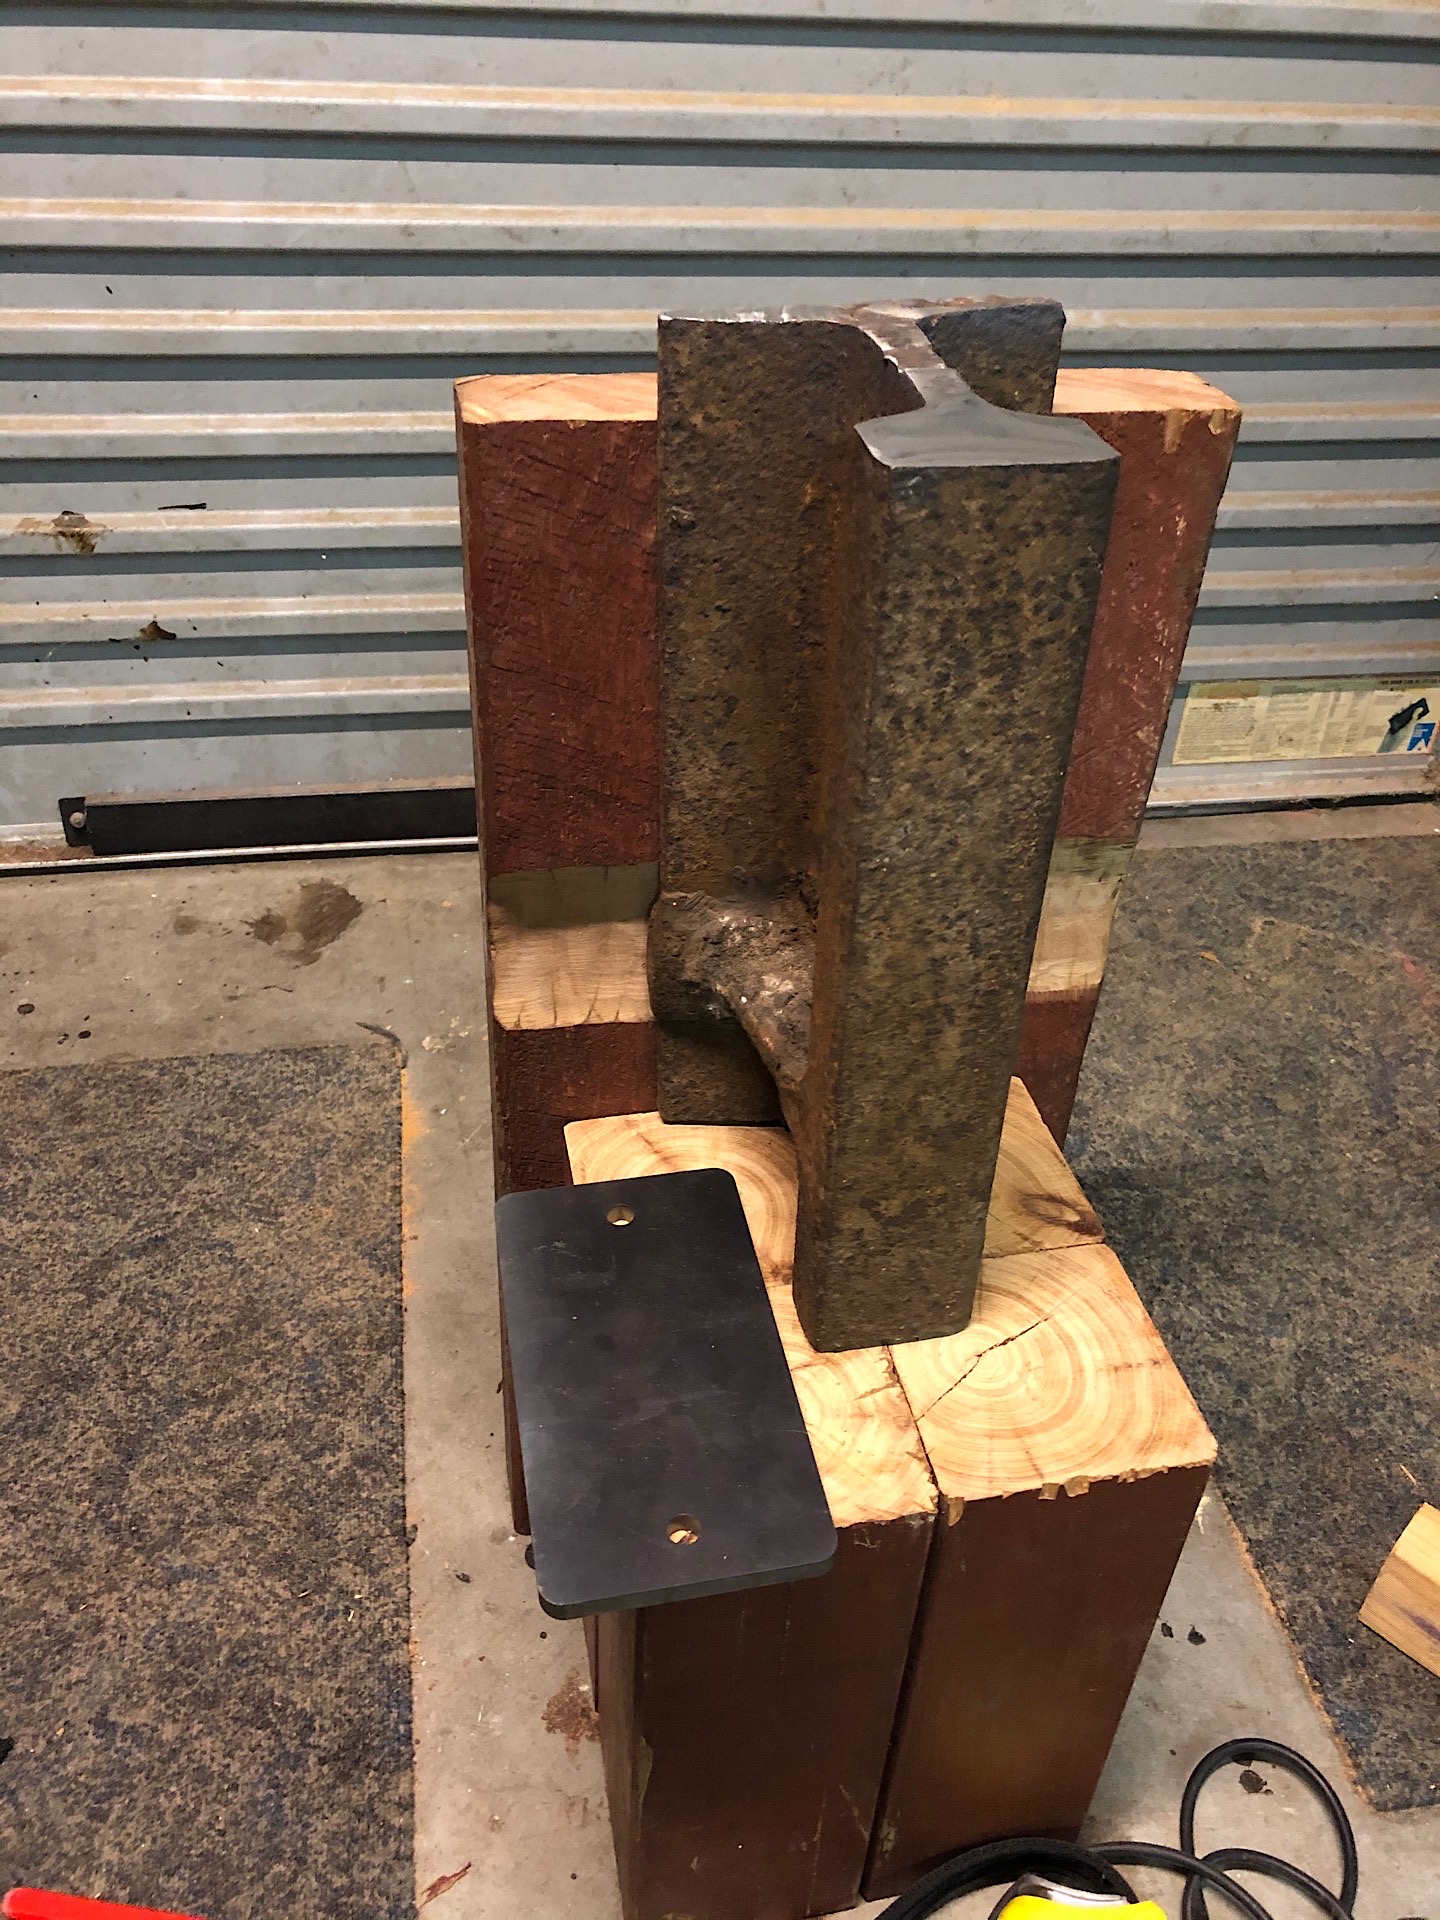 Previewing the rail anvil